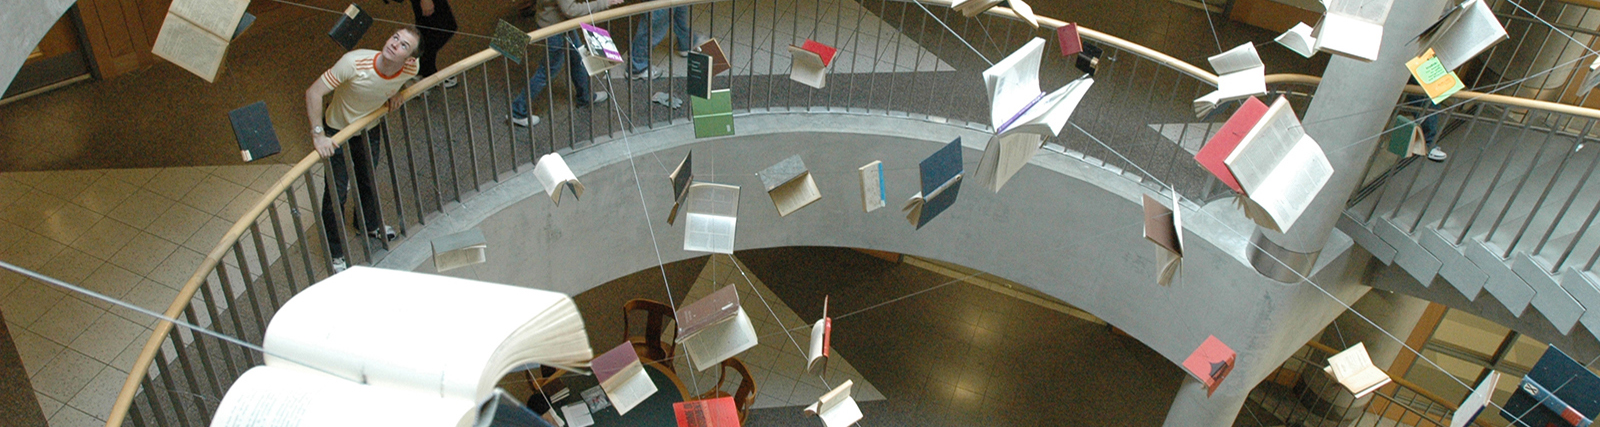 Art installation inside Main Stacks Library in which books are suspended in the air throughout the stairwell.